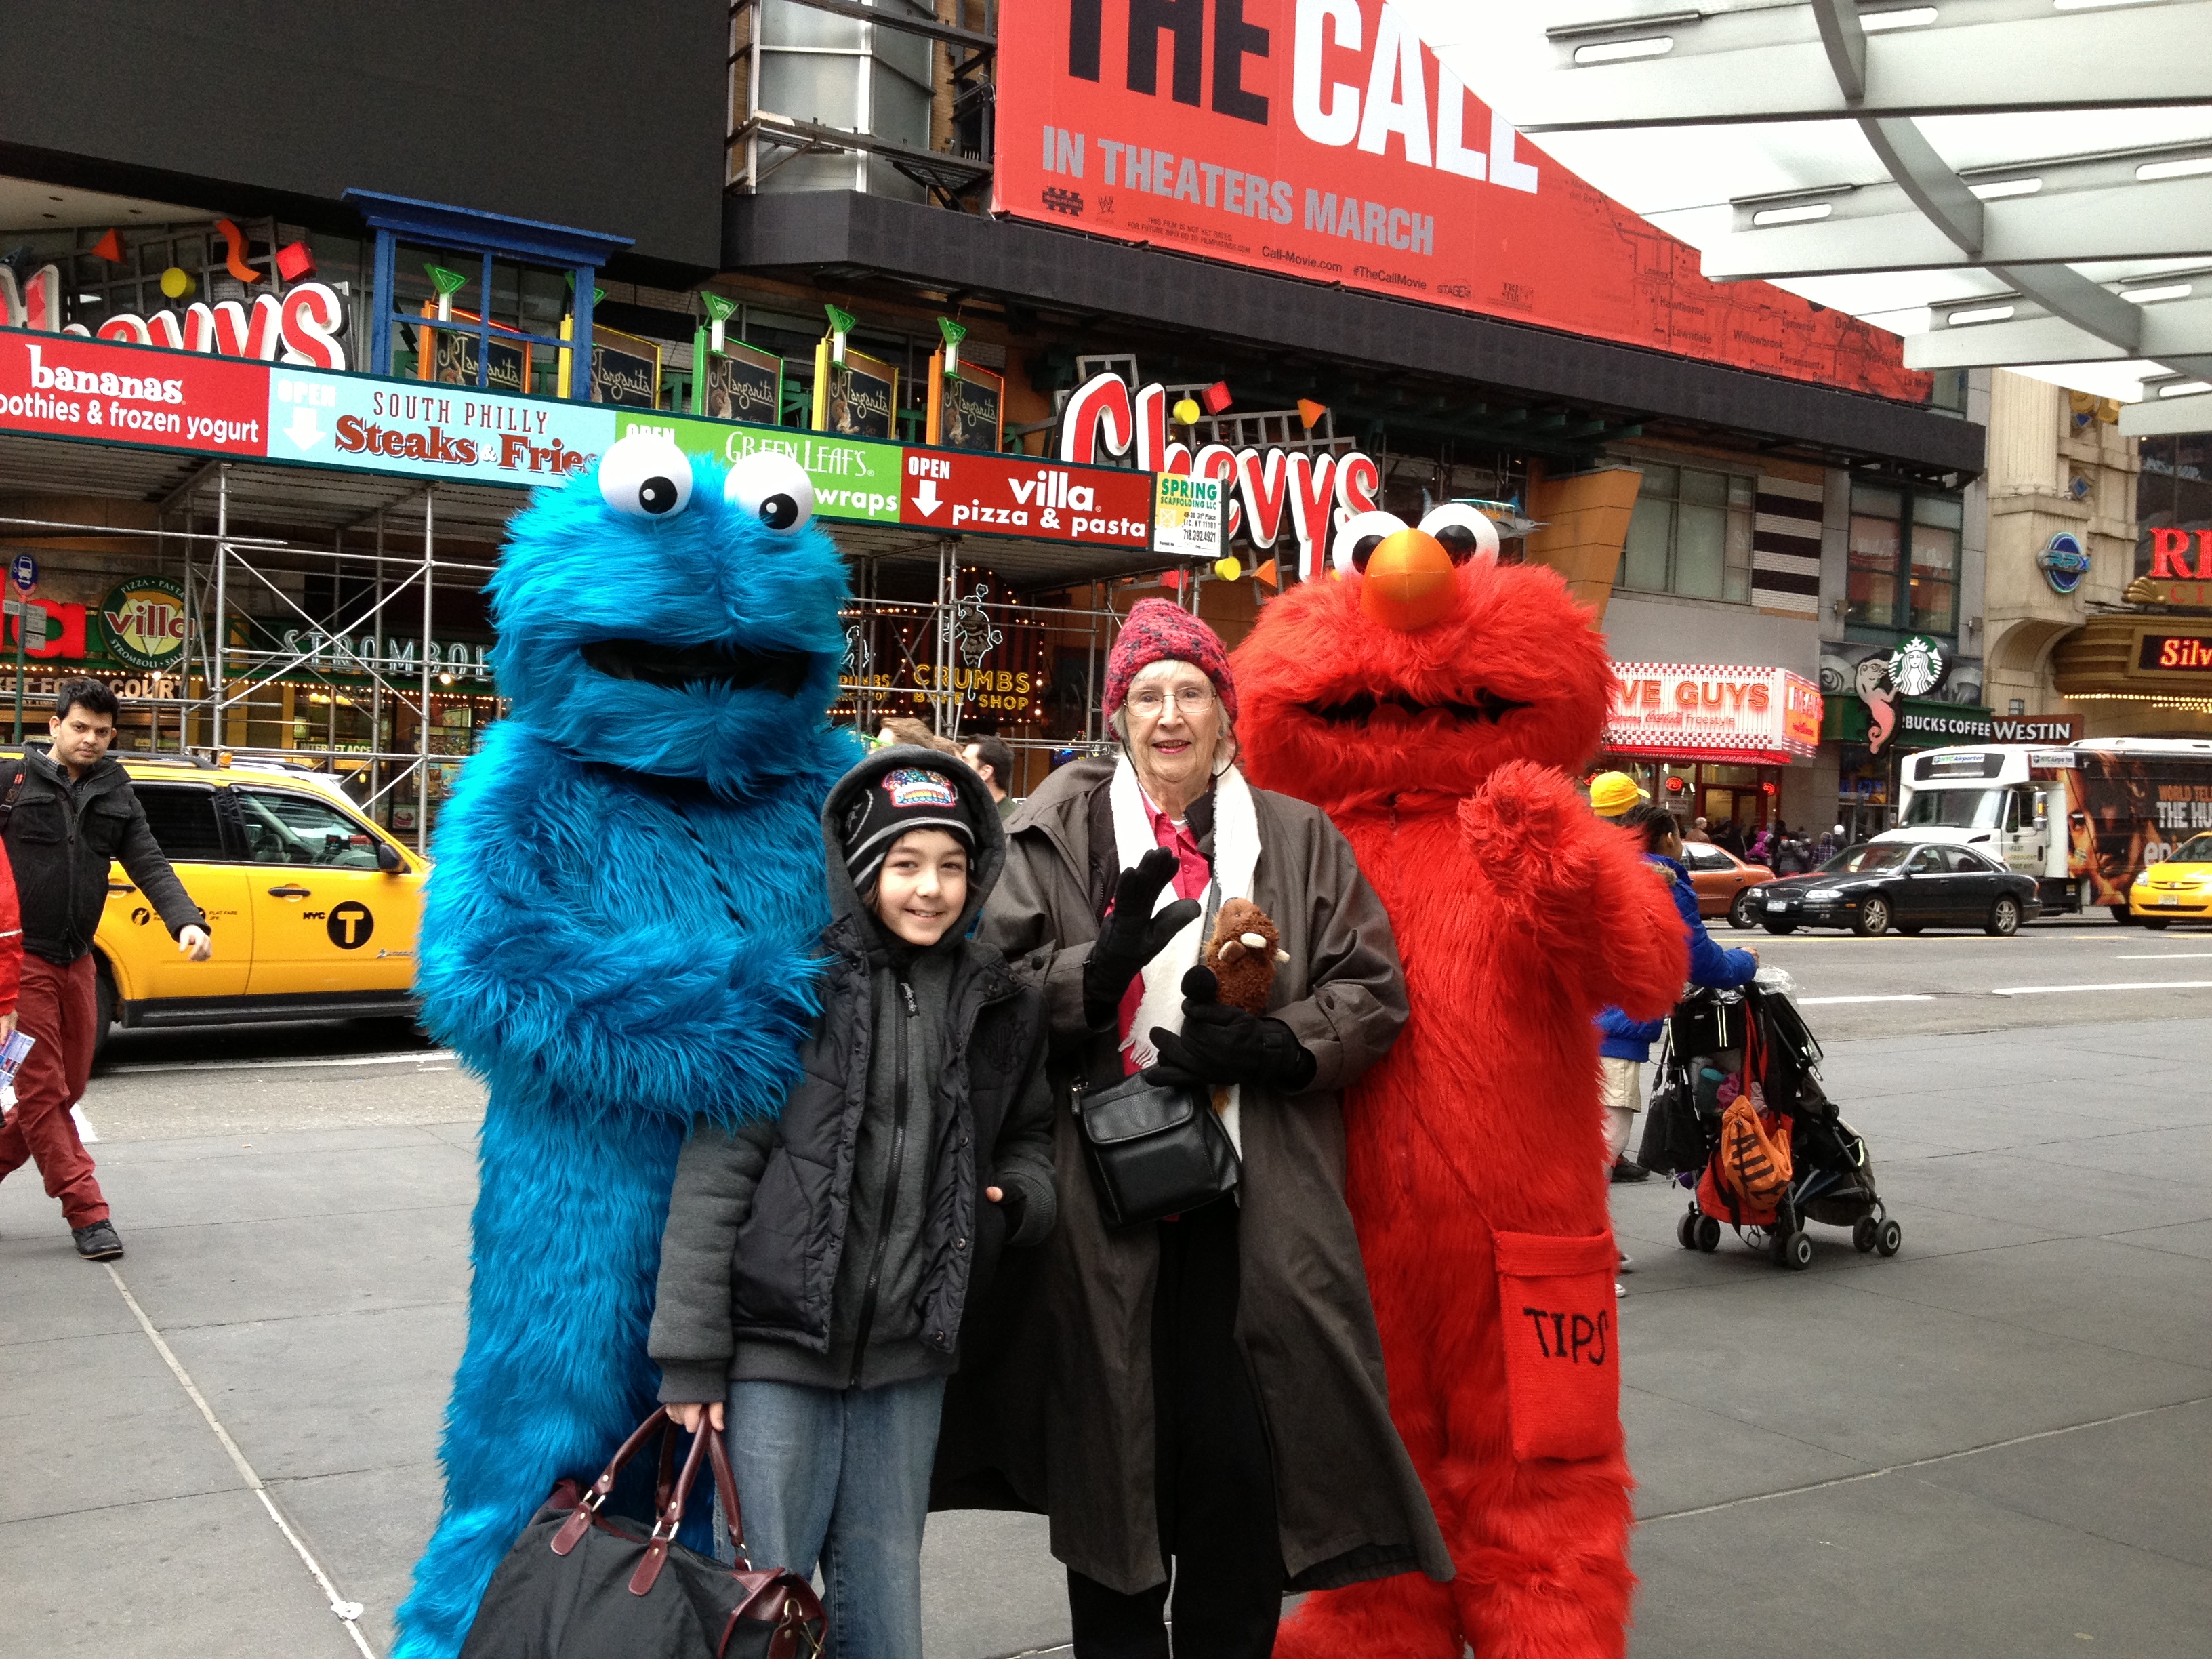 Louise the Great meet Cookie & Elmo